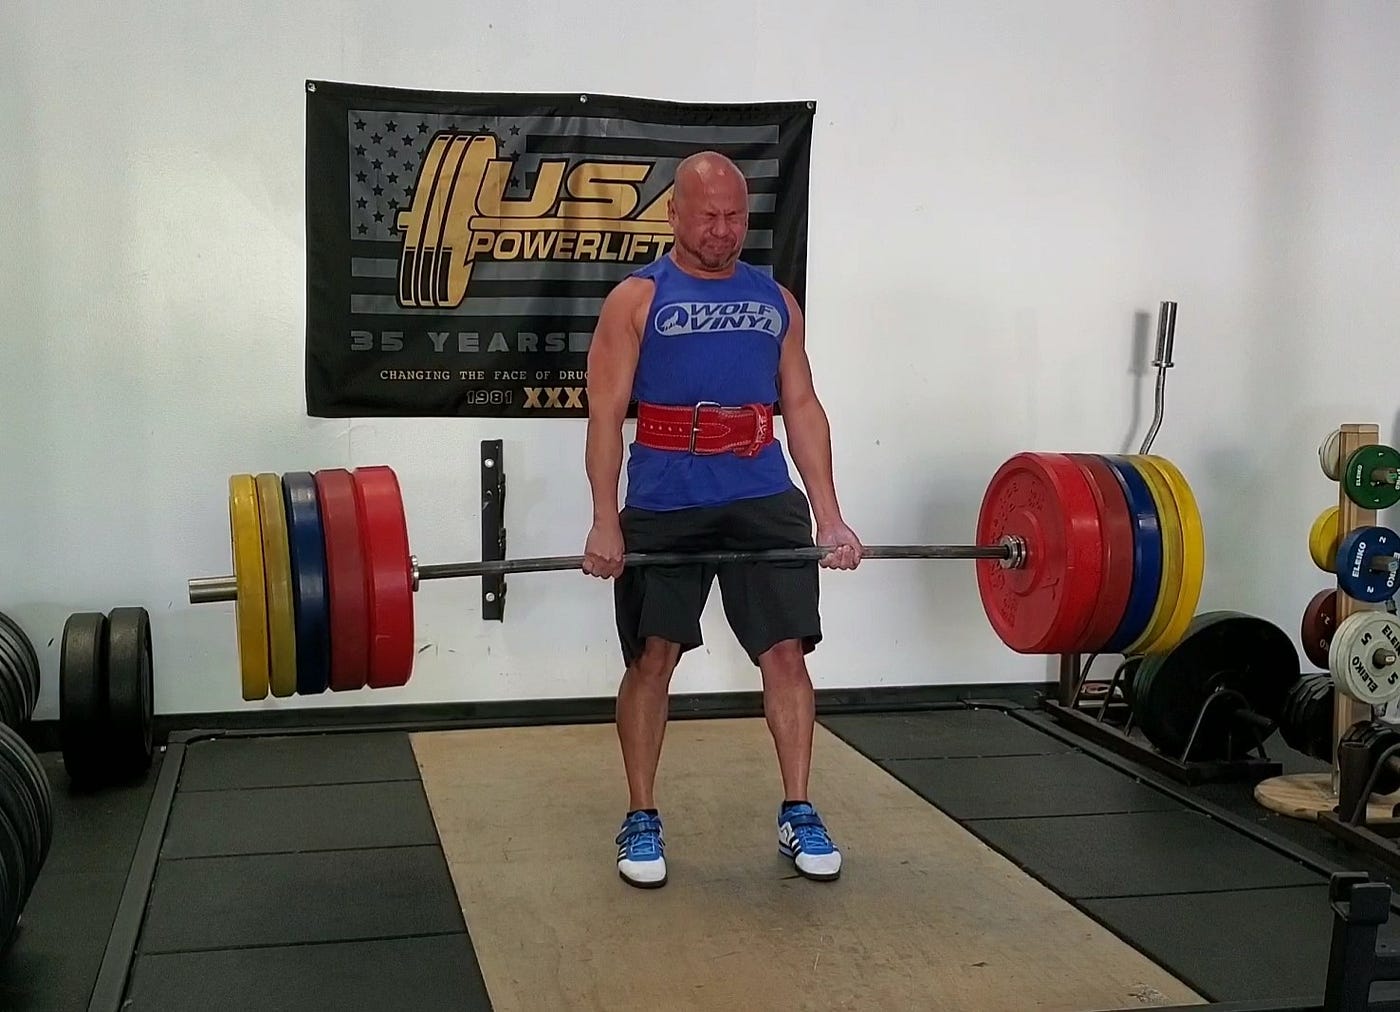 Is Dead-lifting 400 pounds at 1 rep better than 350 pounds at 2 reps?, by  John Destacamento